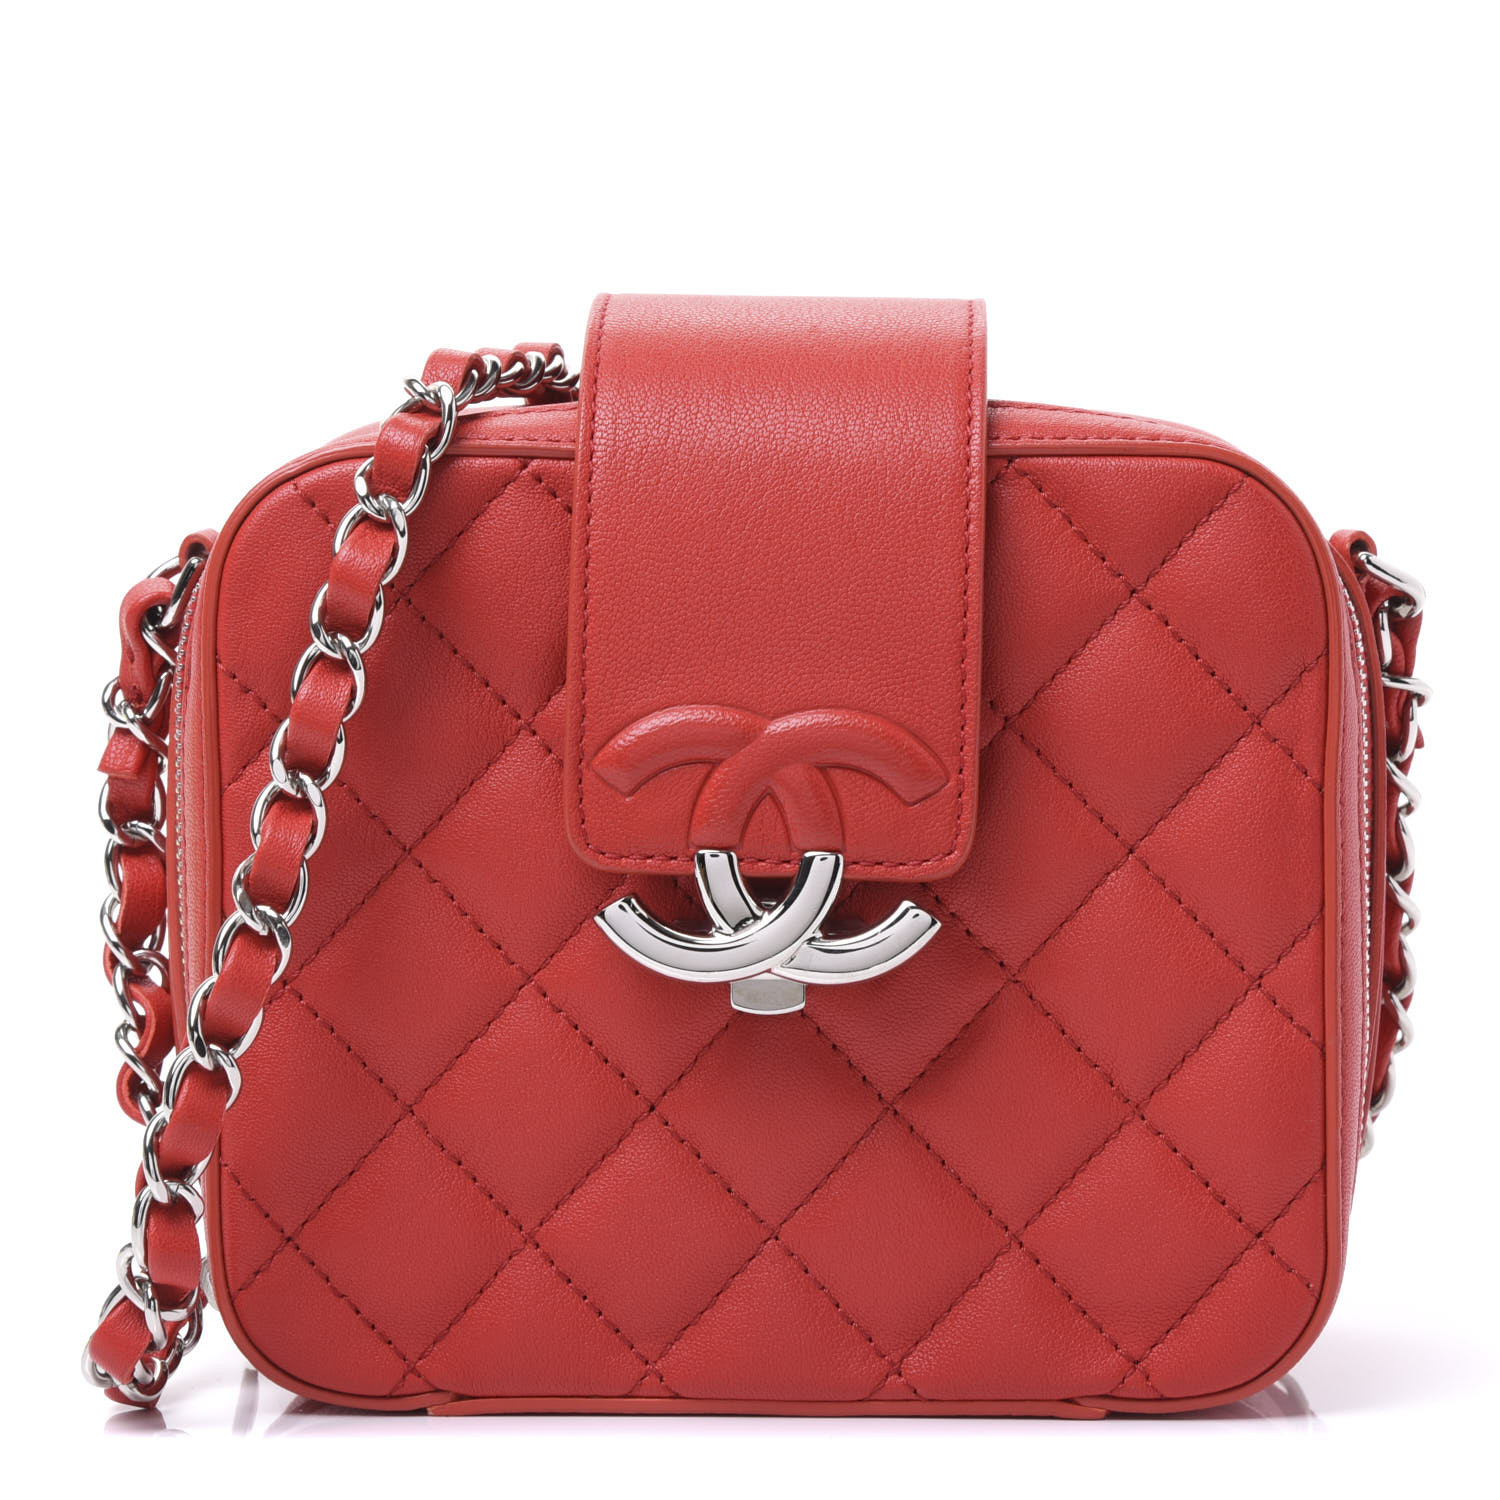 CHANEL Lambskin Quilted Mini CC Box Camera Bag Red 571515 | FASHIONPHILE